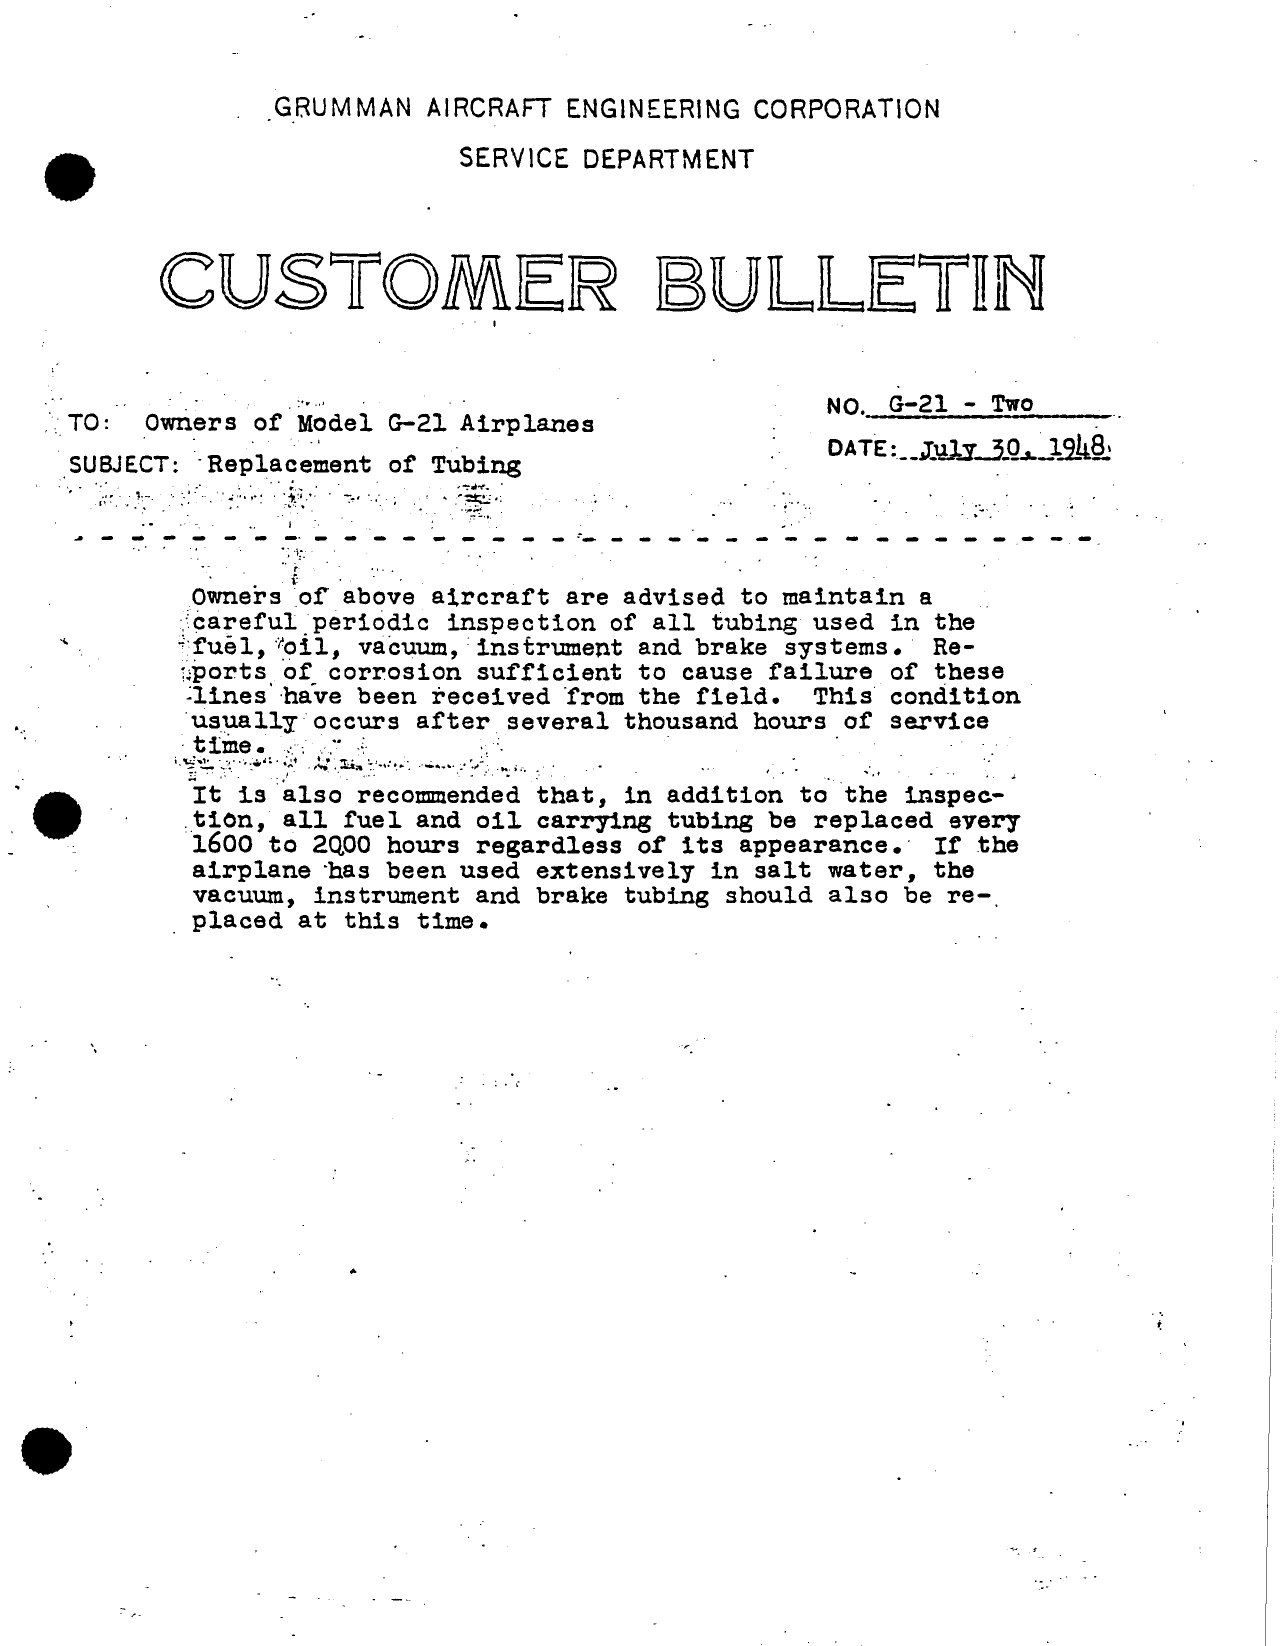 Sample page 1 from AirCorps Library document: Replacement of Tubing on Model G-21